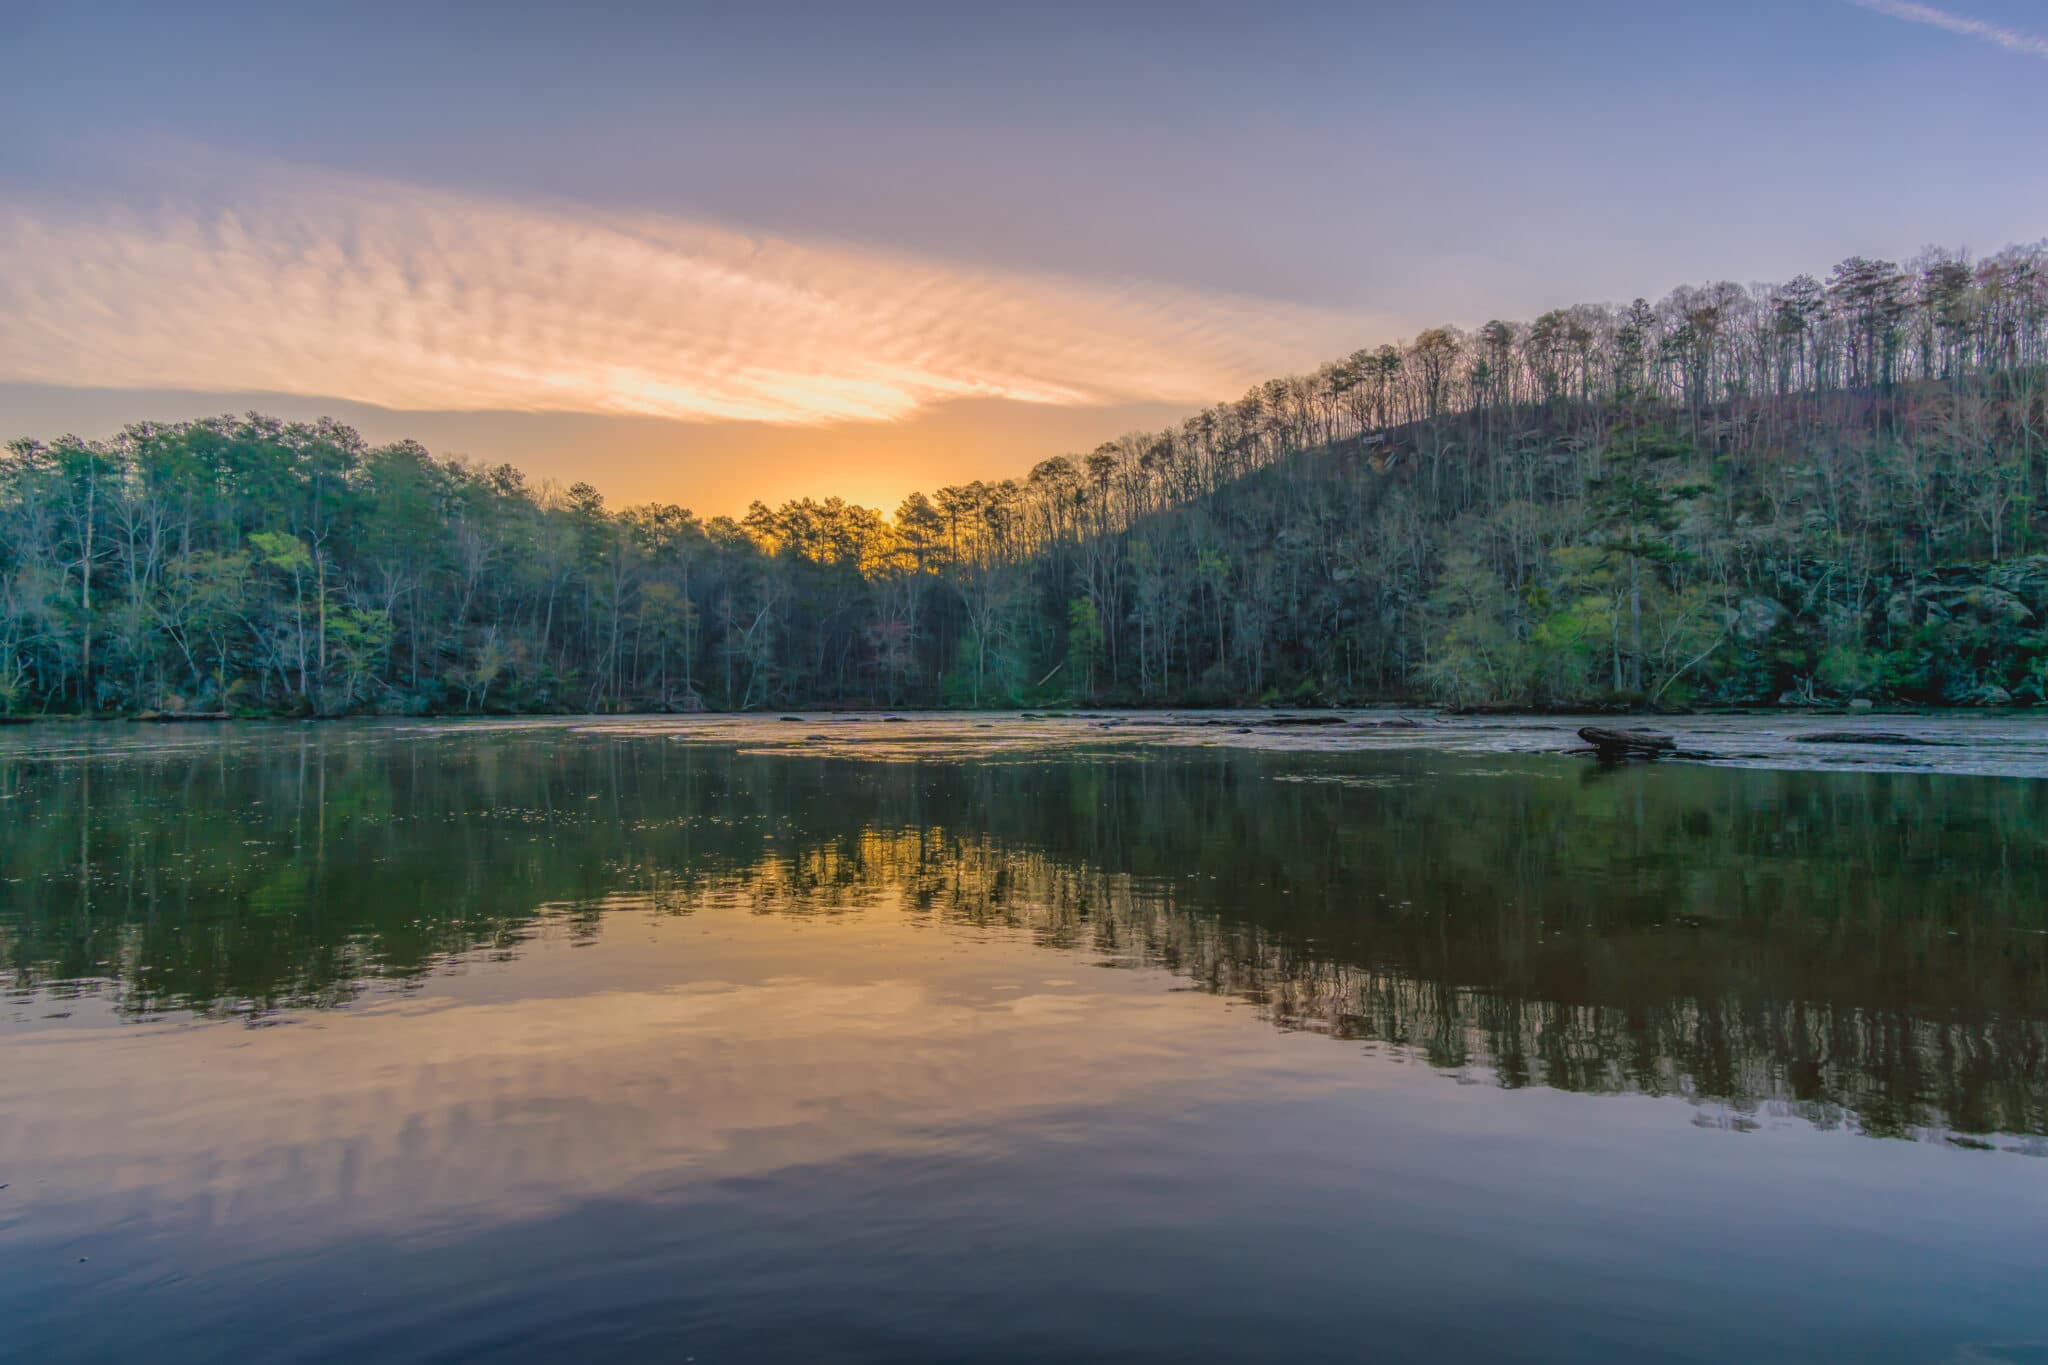 New Atlanta park will have access to the Chattahoochee River